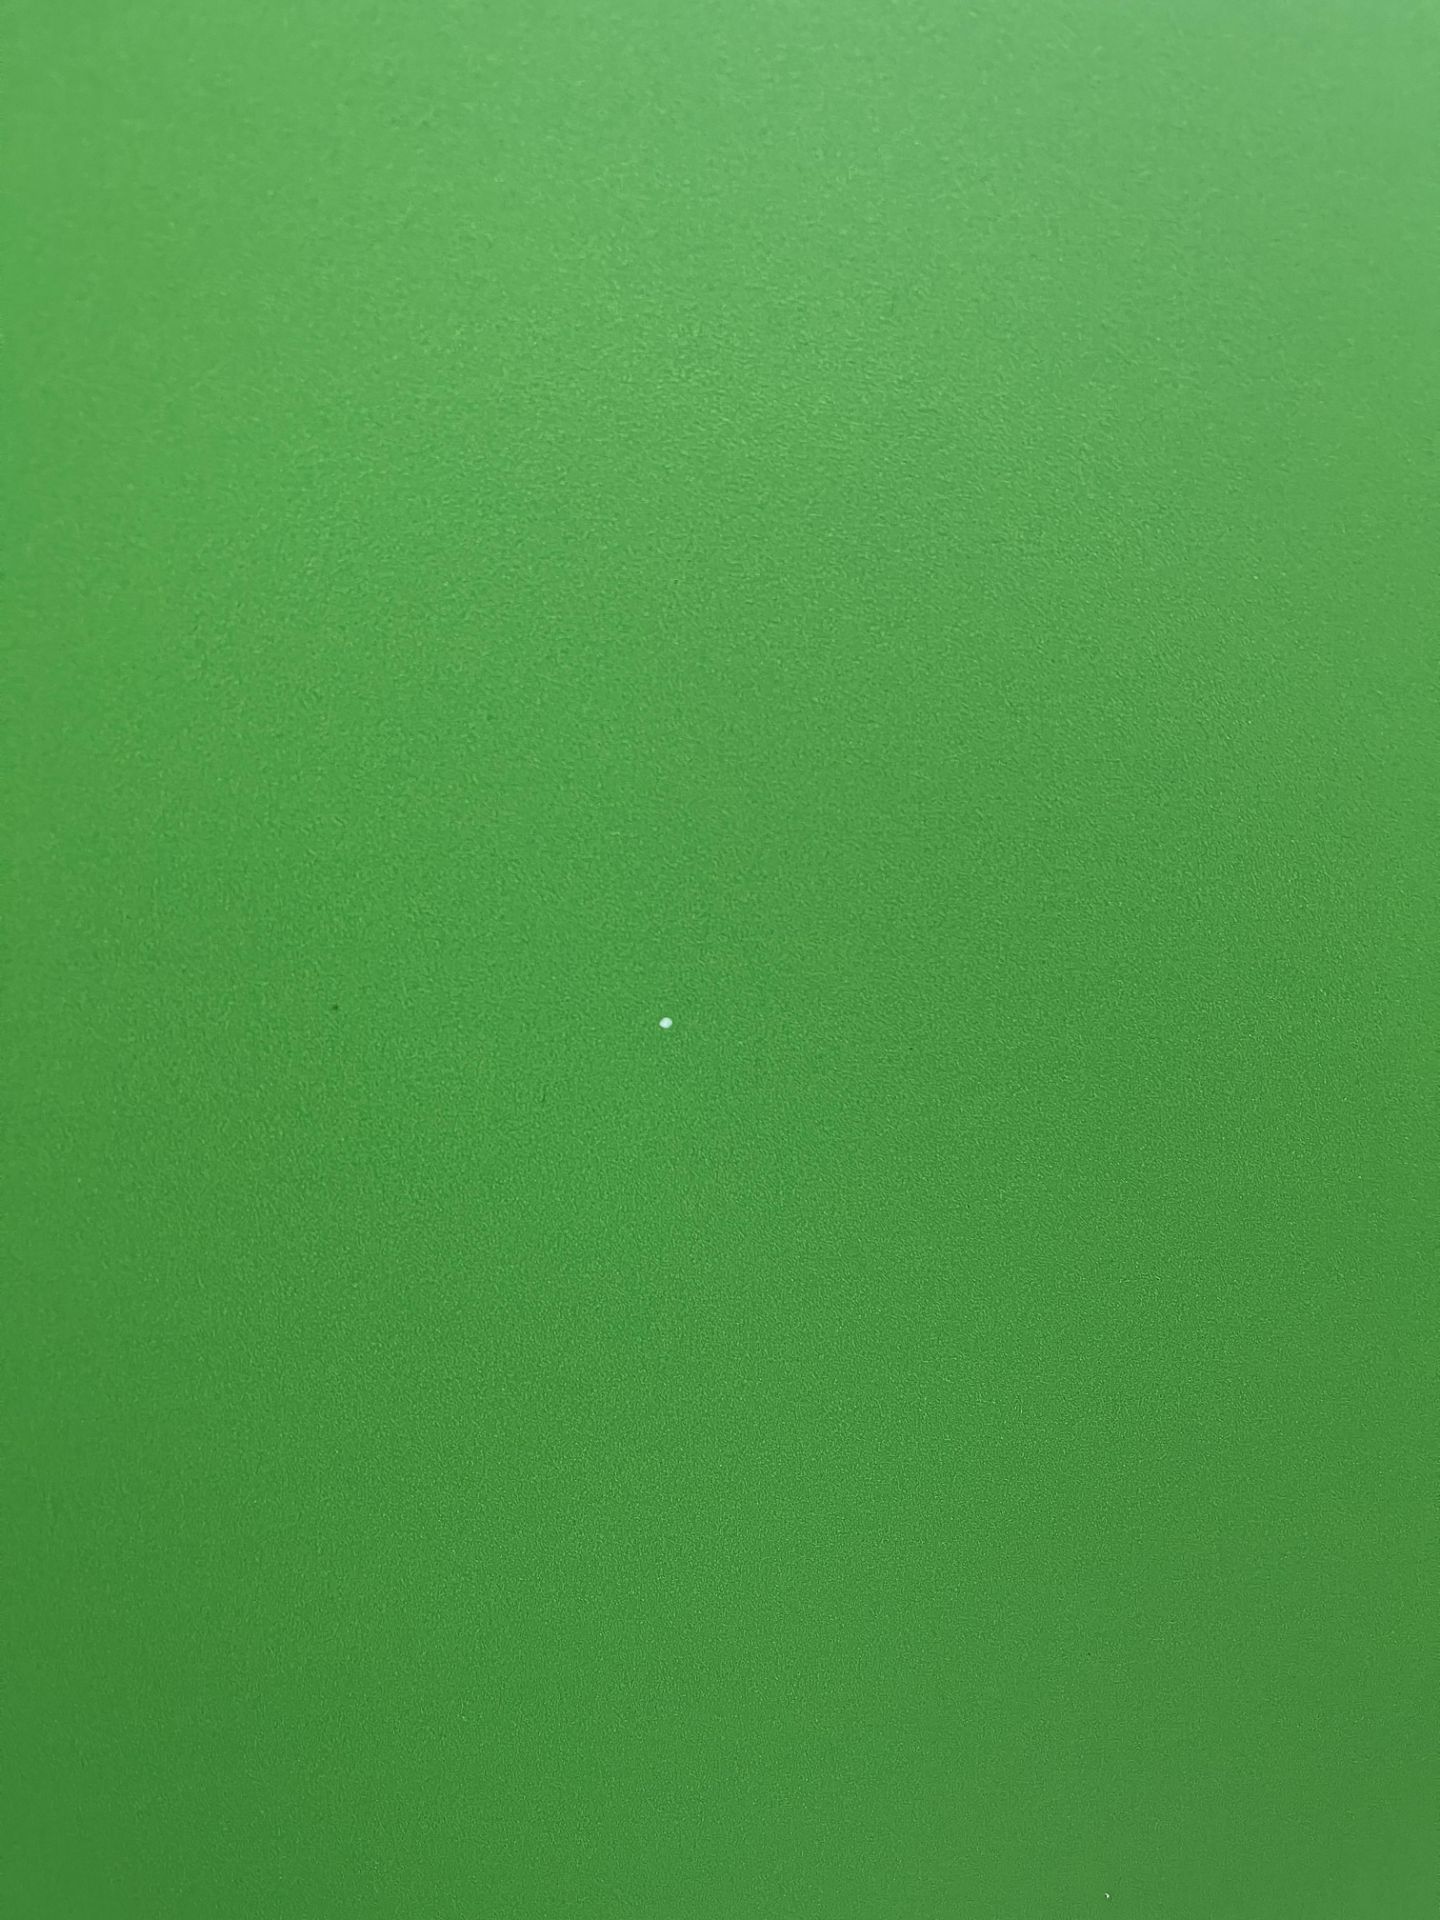 3 x Collapsable Green Screens - As pictured - Image 3 of 10